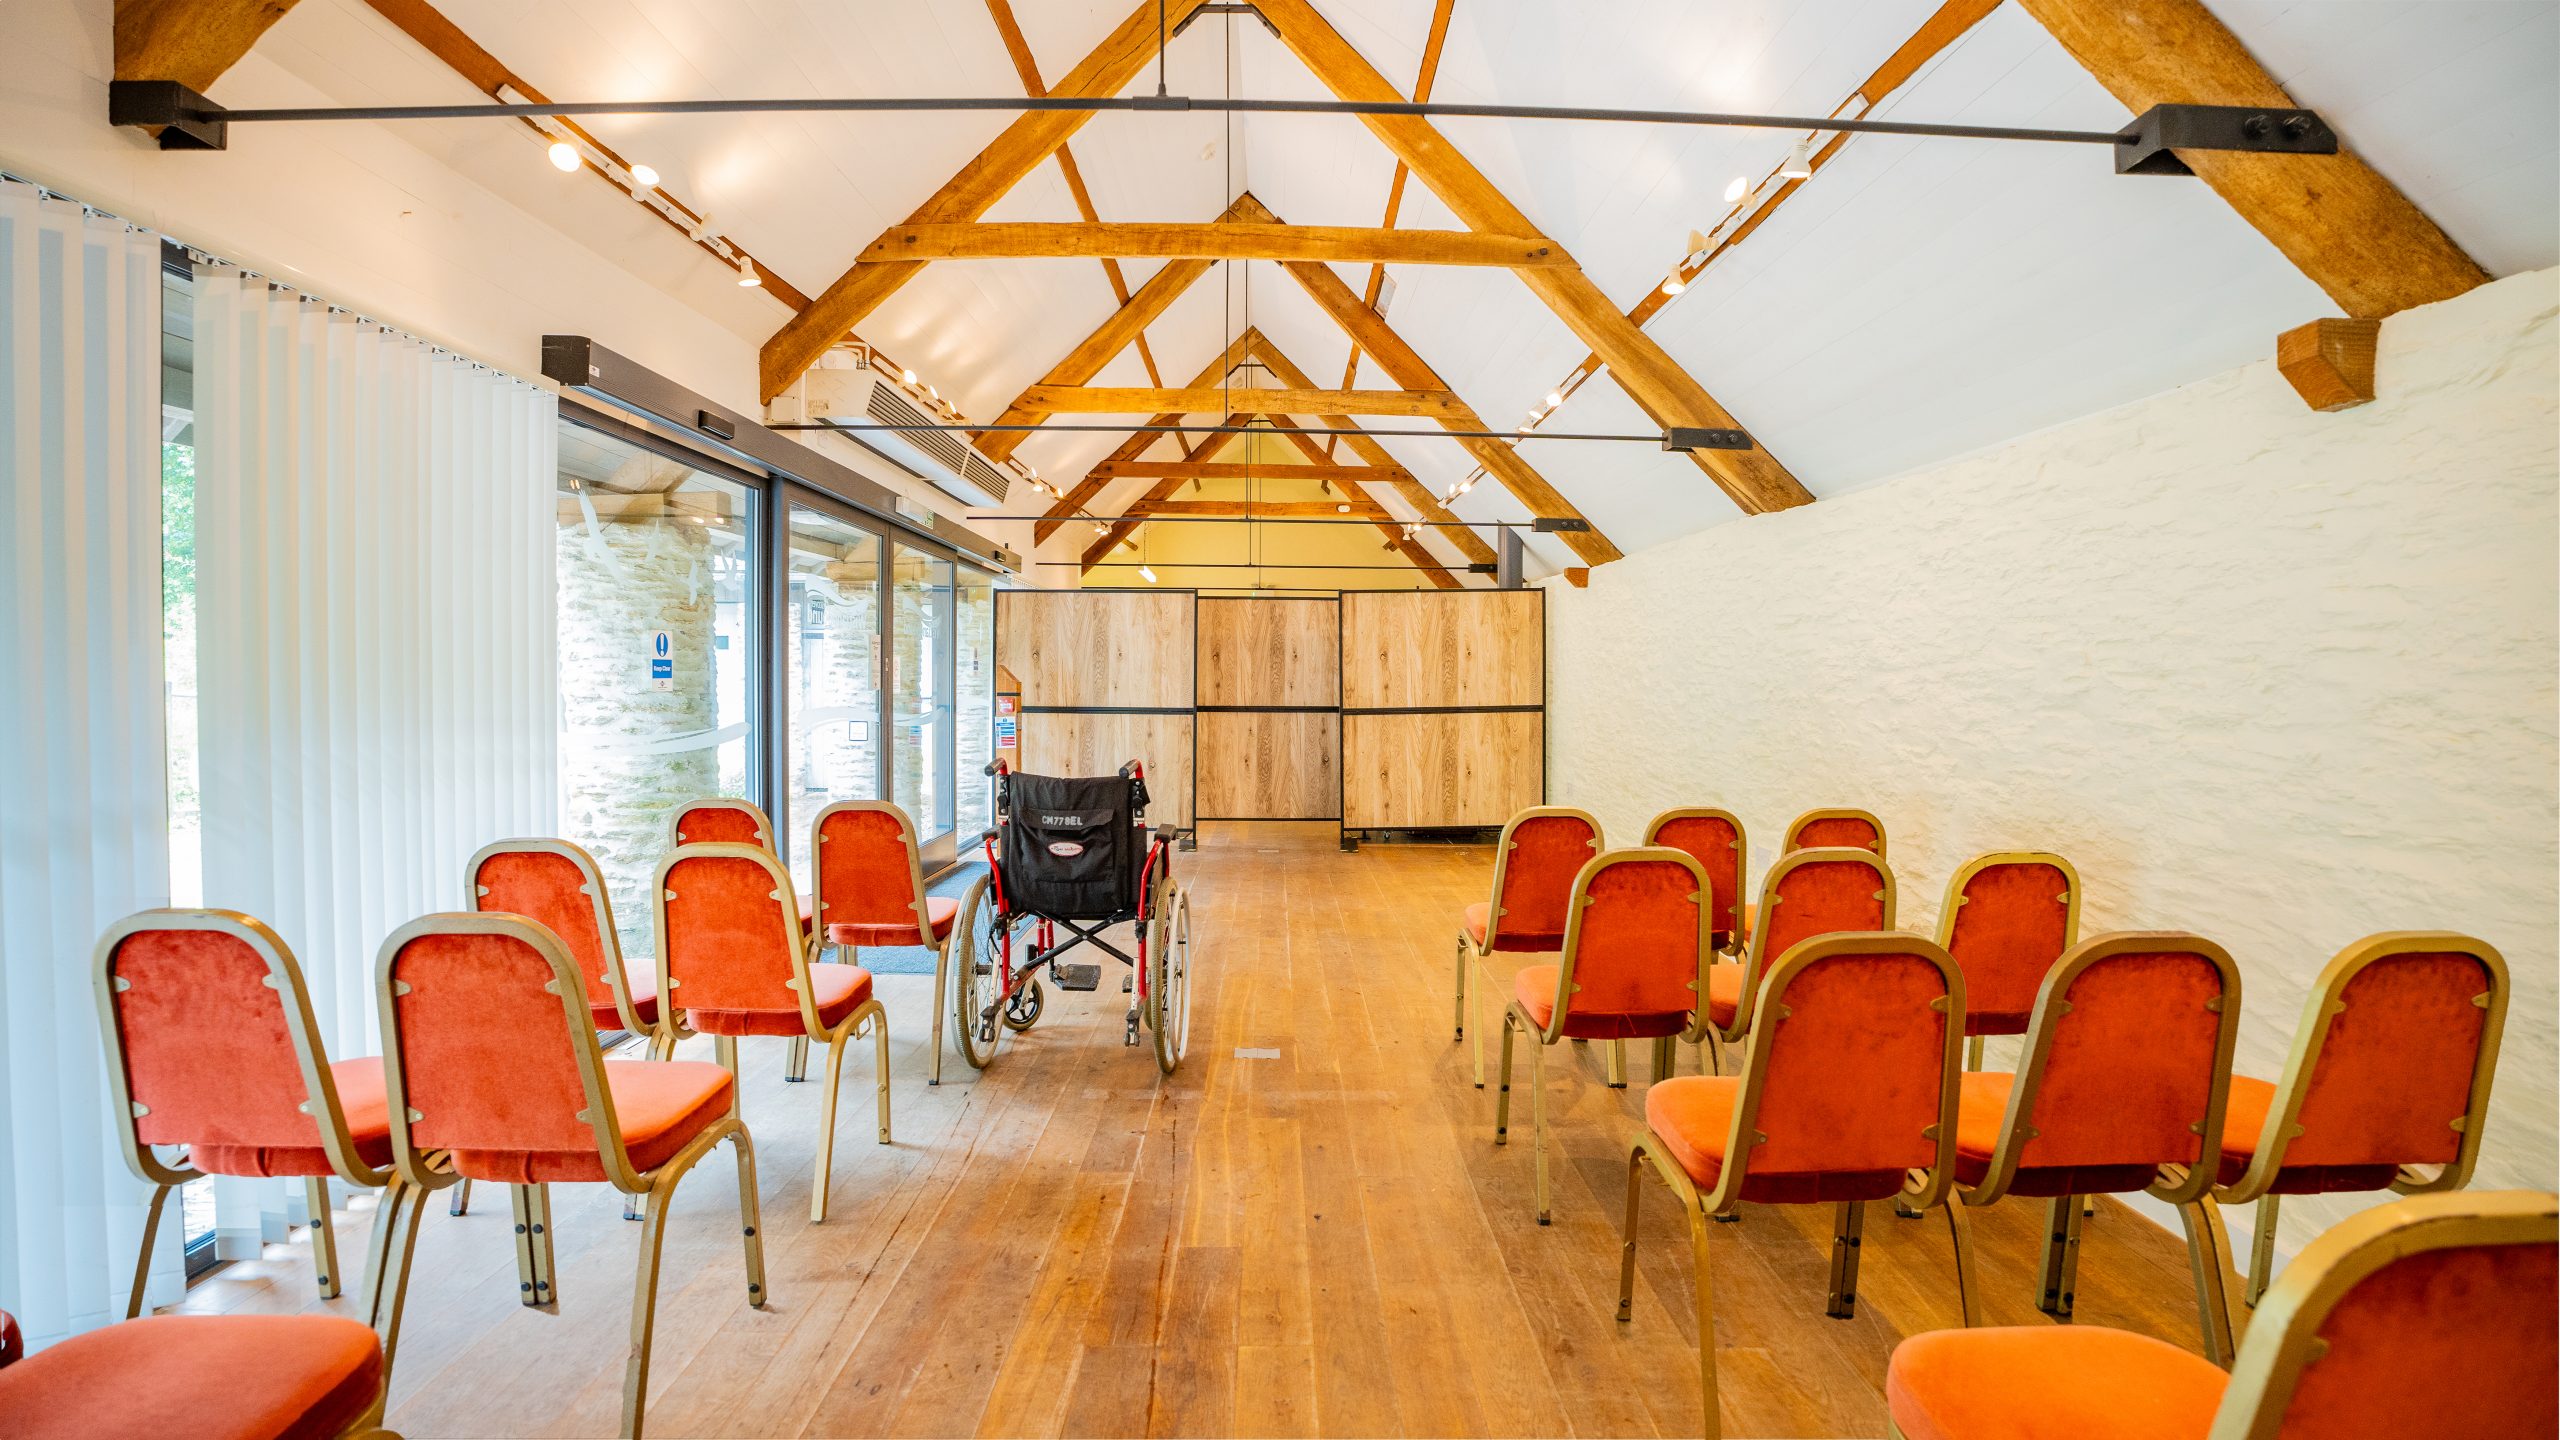 A row of orange chairs face away from the camera, with an aisle of empty space in the middle. There's ablack wheelchair among the chairs. There are windows on the left with blinds and a white coloured wall on the right, with wooden beams above in a triangle shape up to the roof.